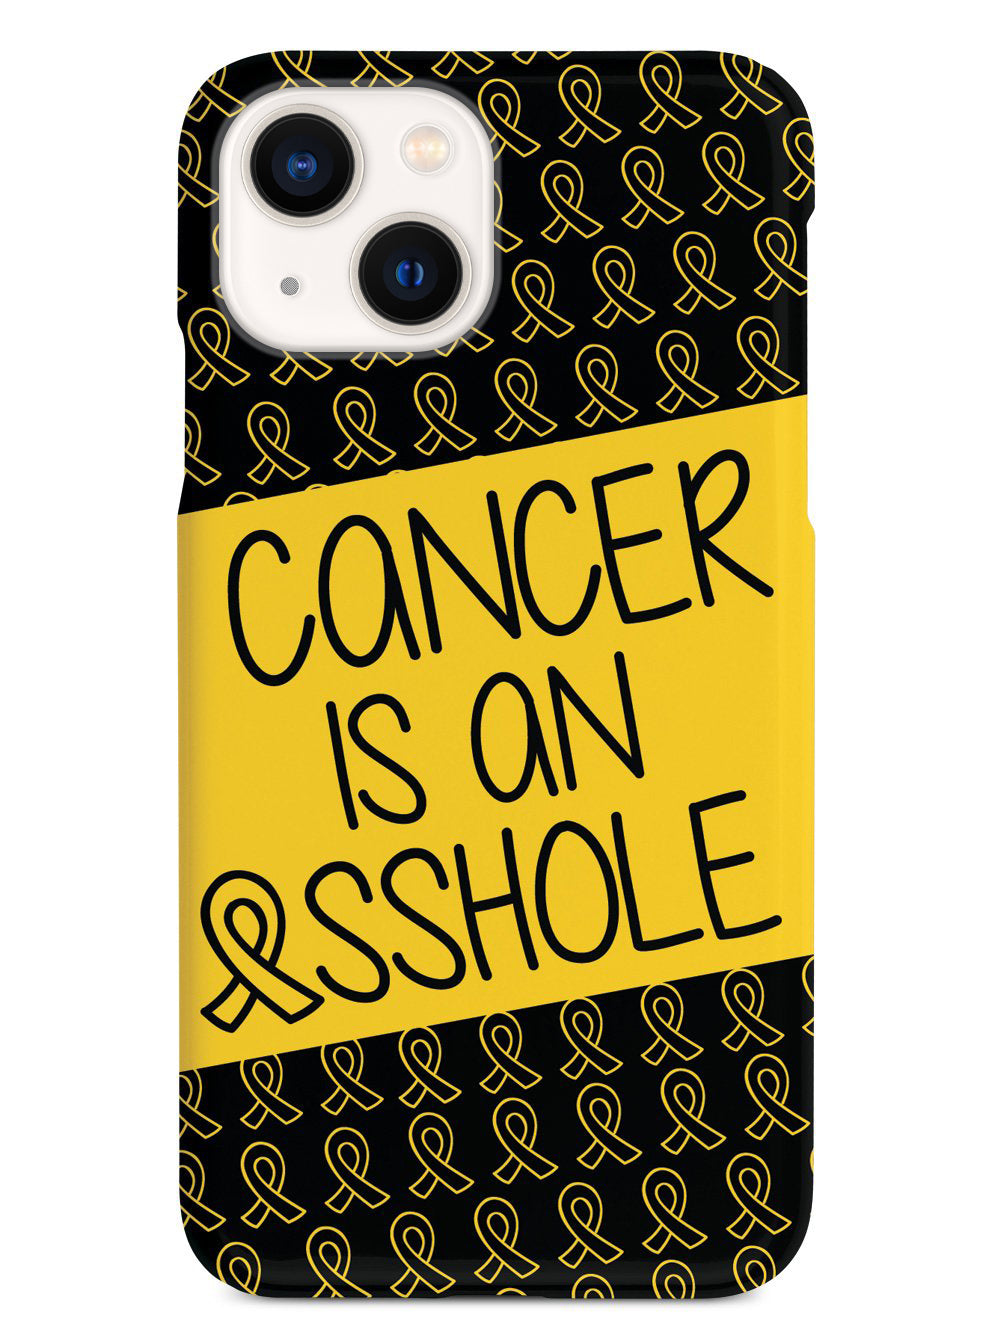 Cancer is an ASSHOLE Yellow Case